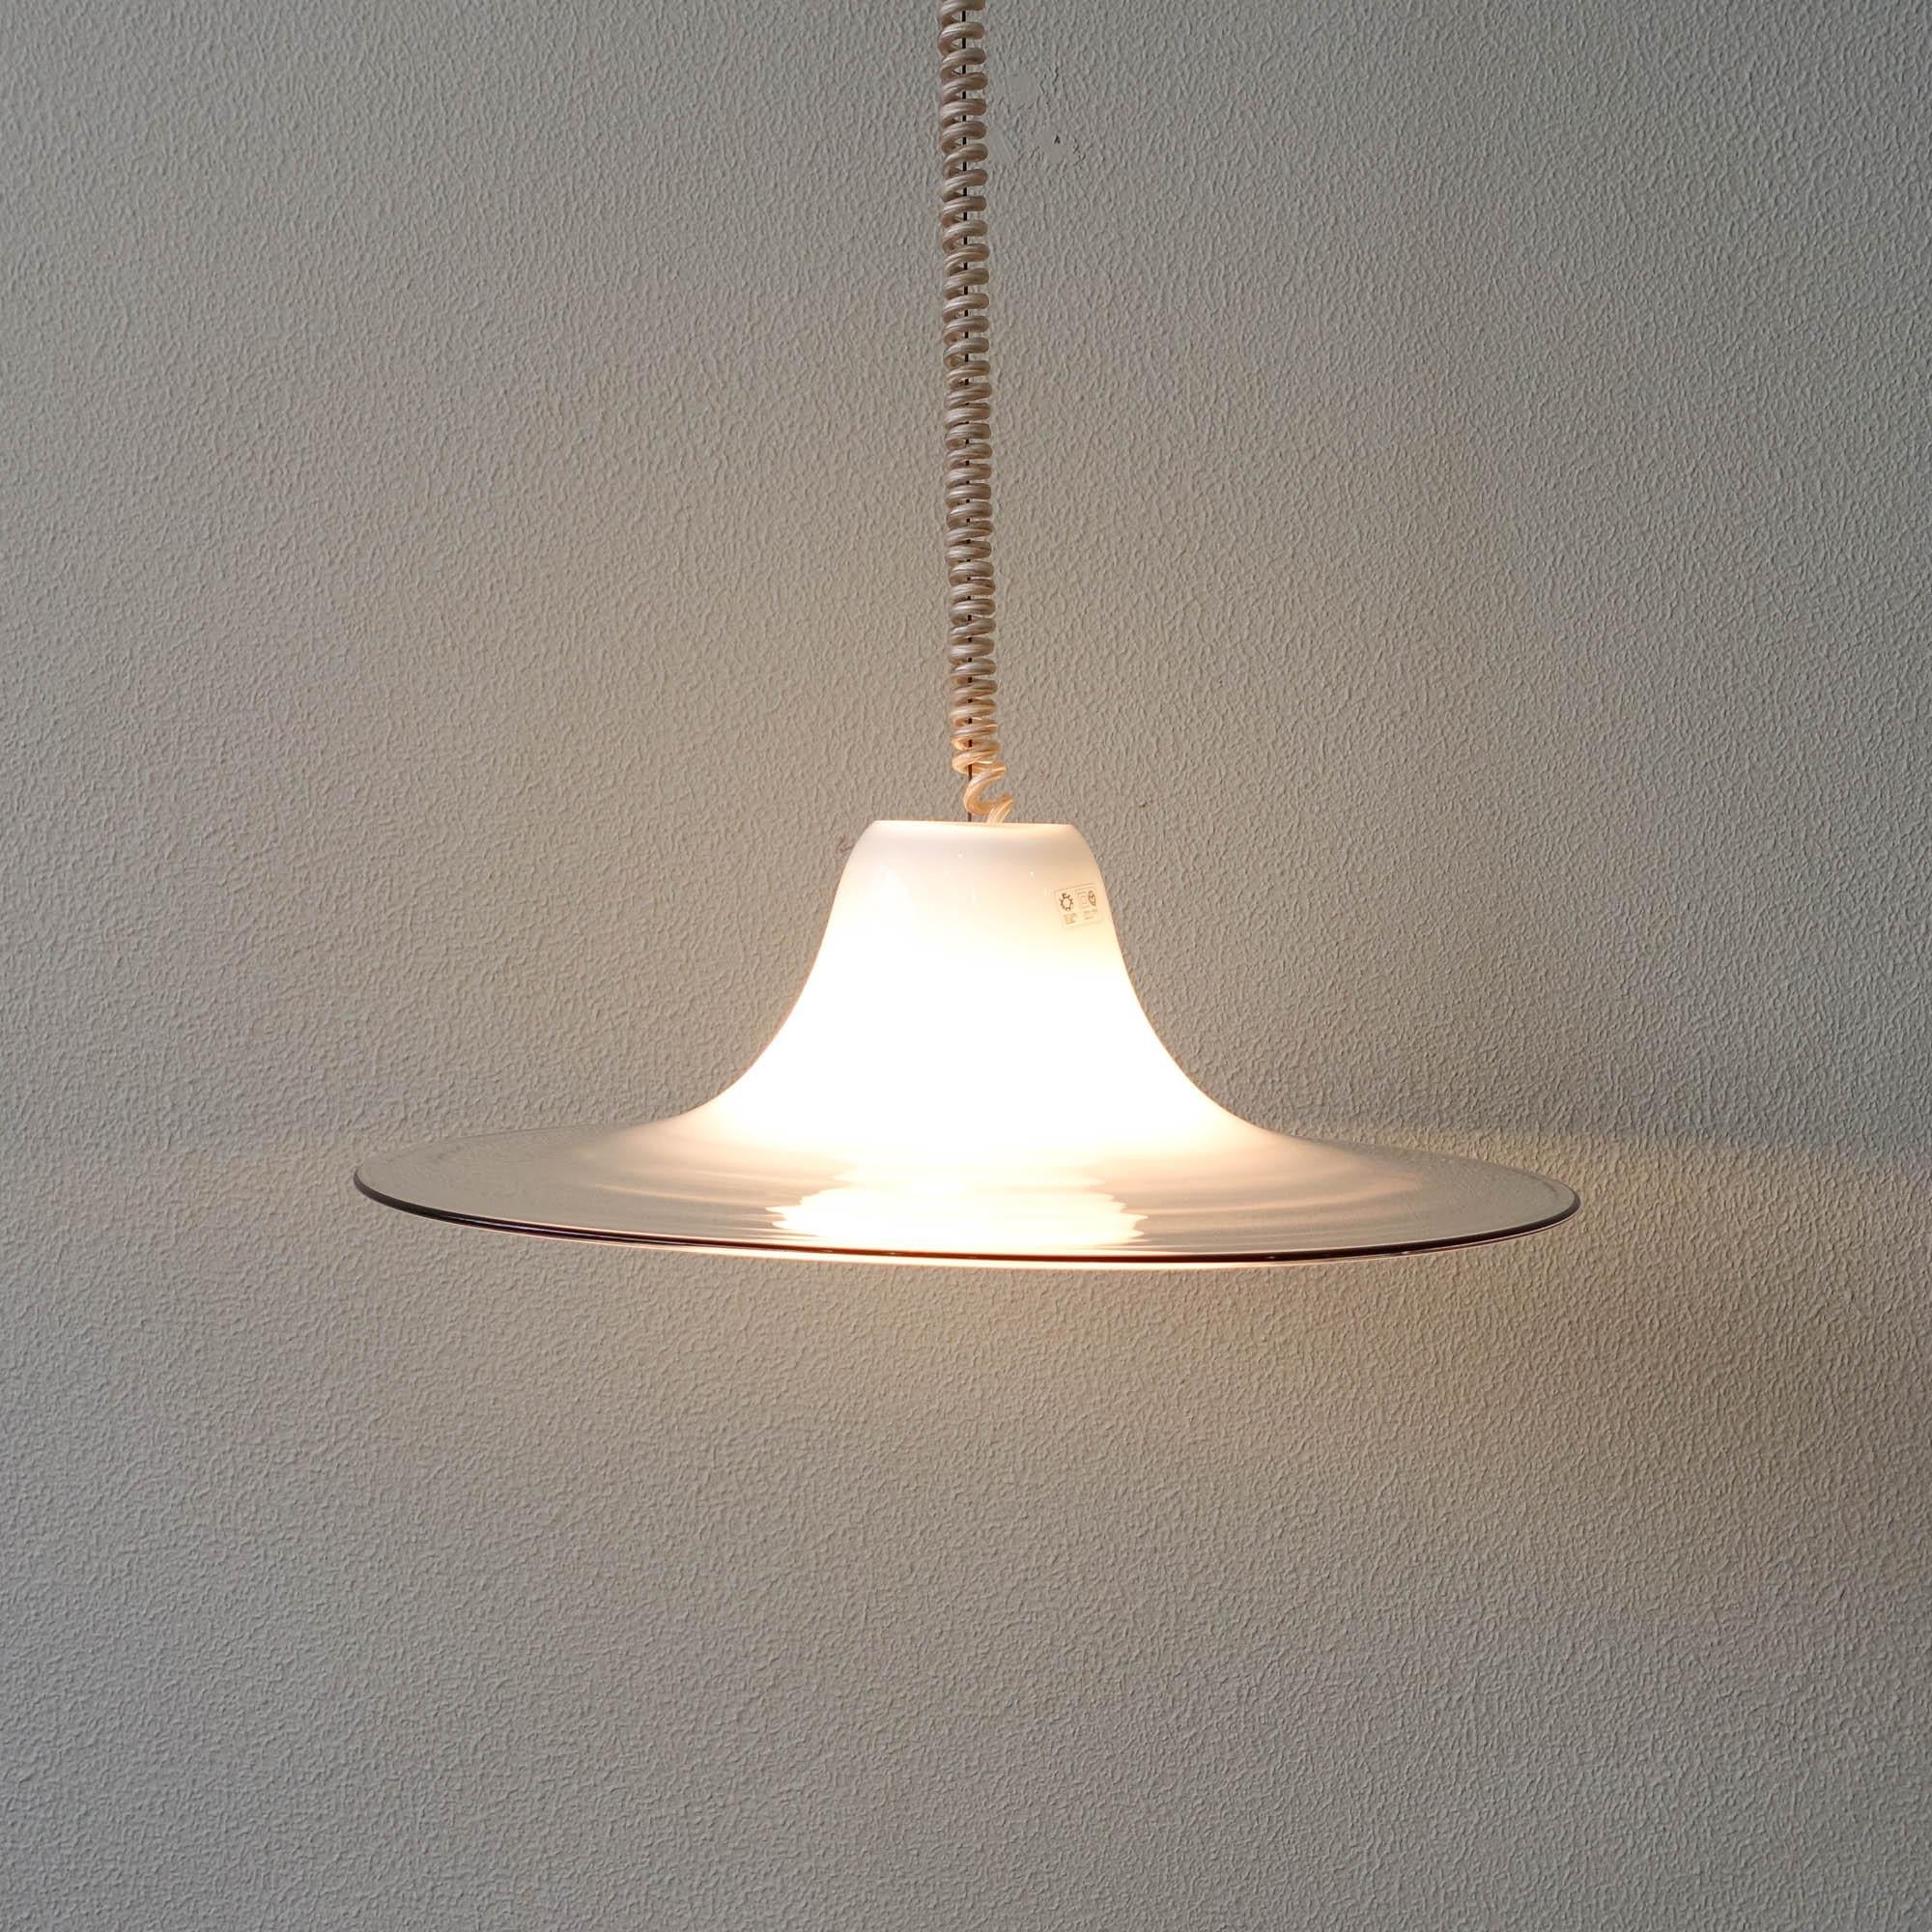 This pendant lamp was designed by Renato Toso and produced by Leucos in Italy, during the 1970's. It is made of a thick piece of murano glass, that goes from opaline white to transparent. With the original label of the manufacture and marked also on